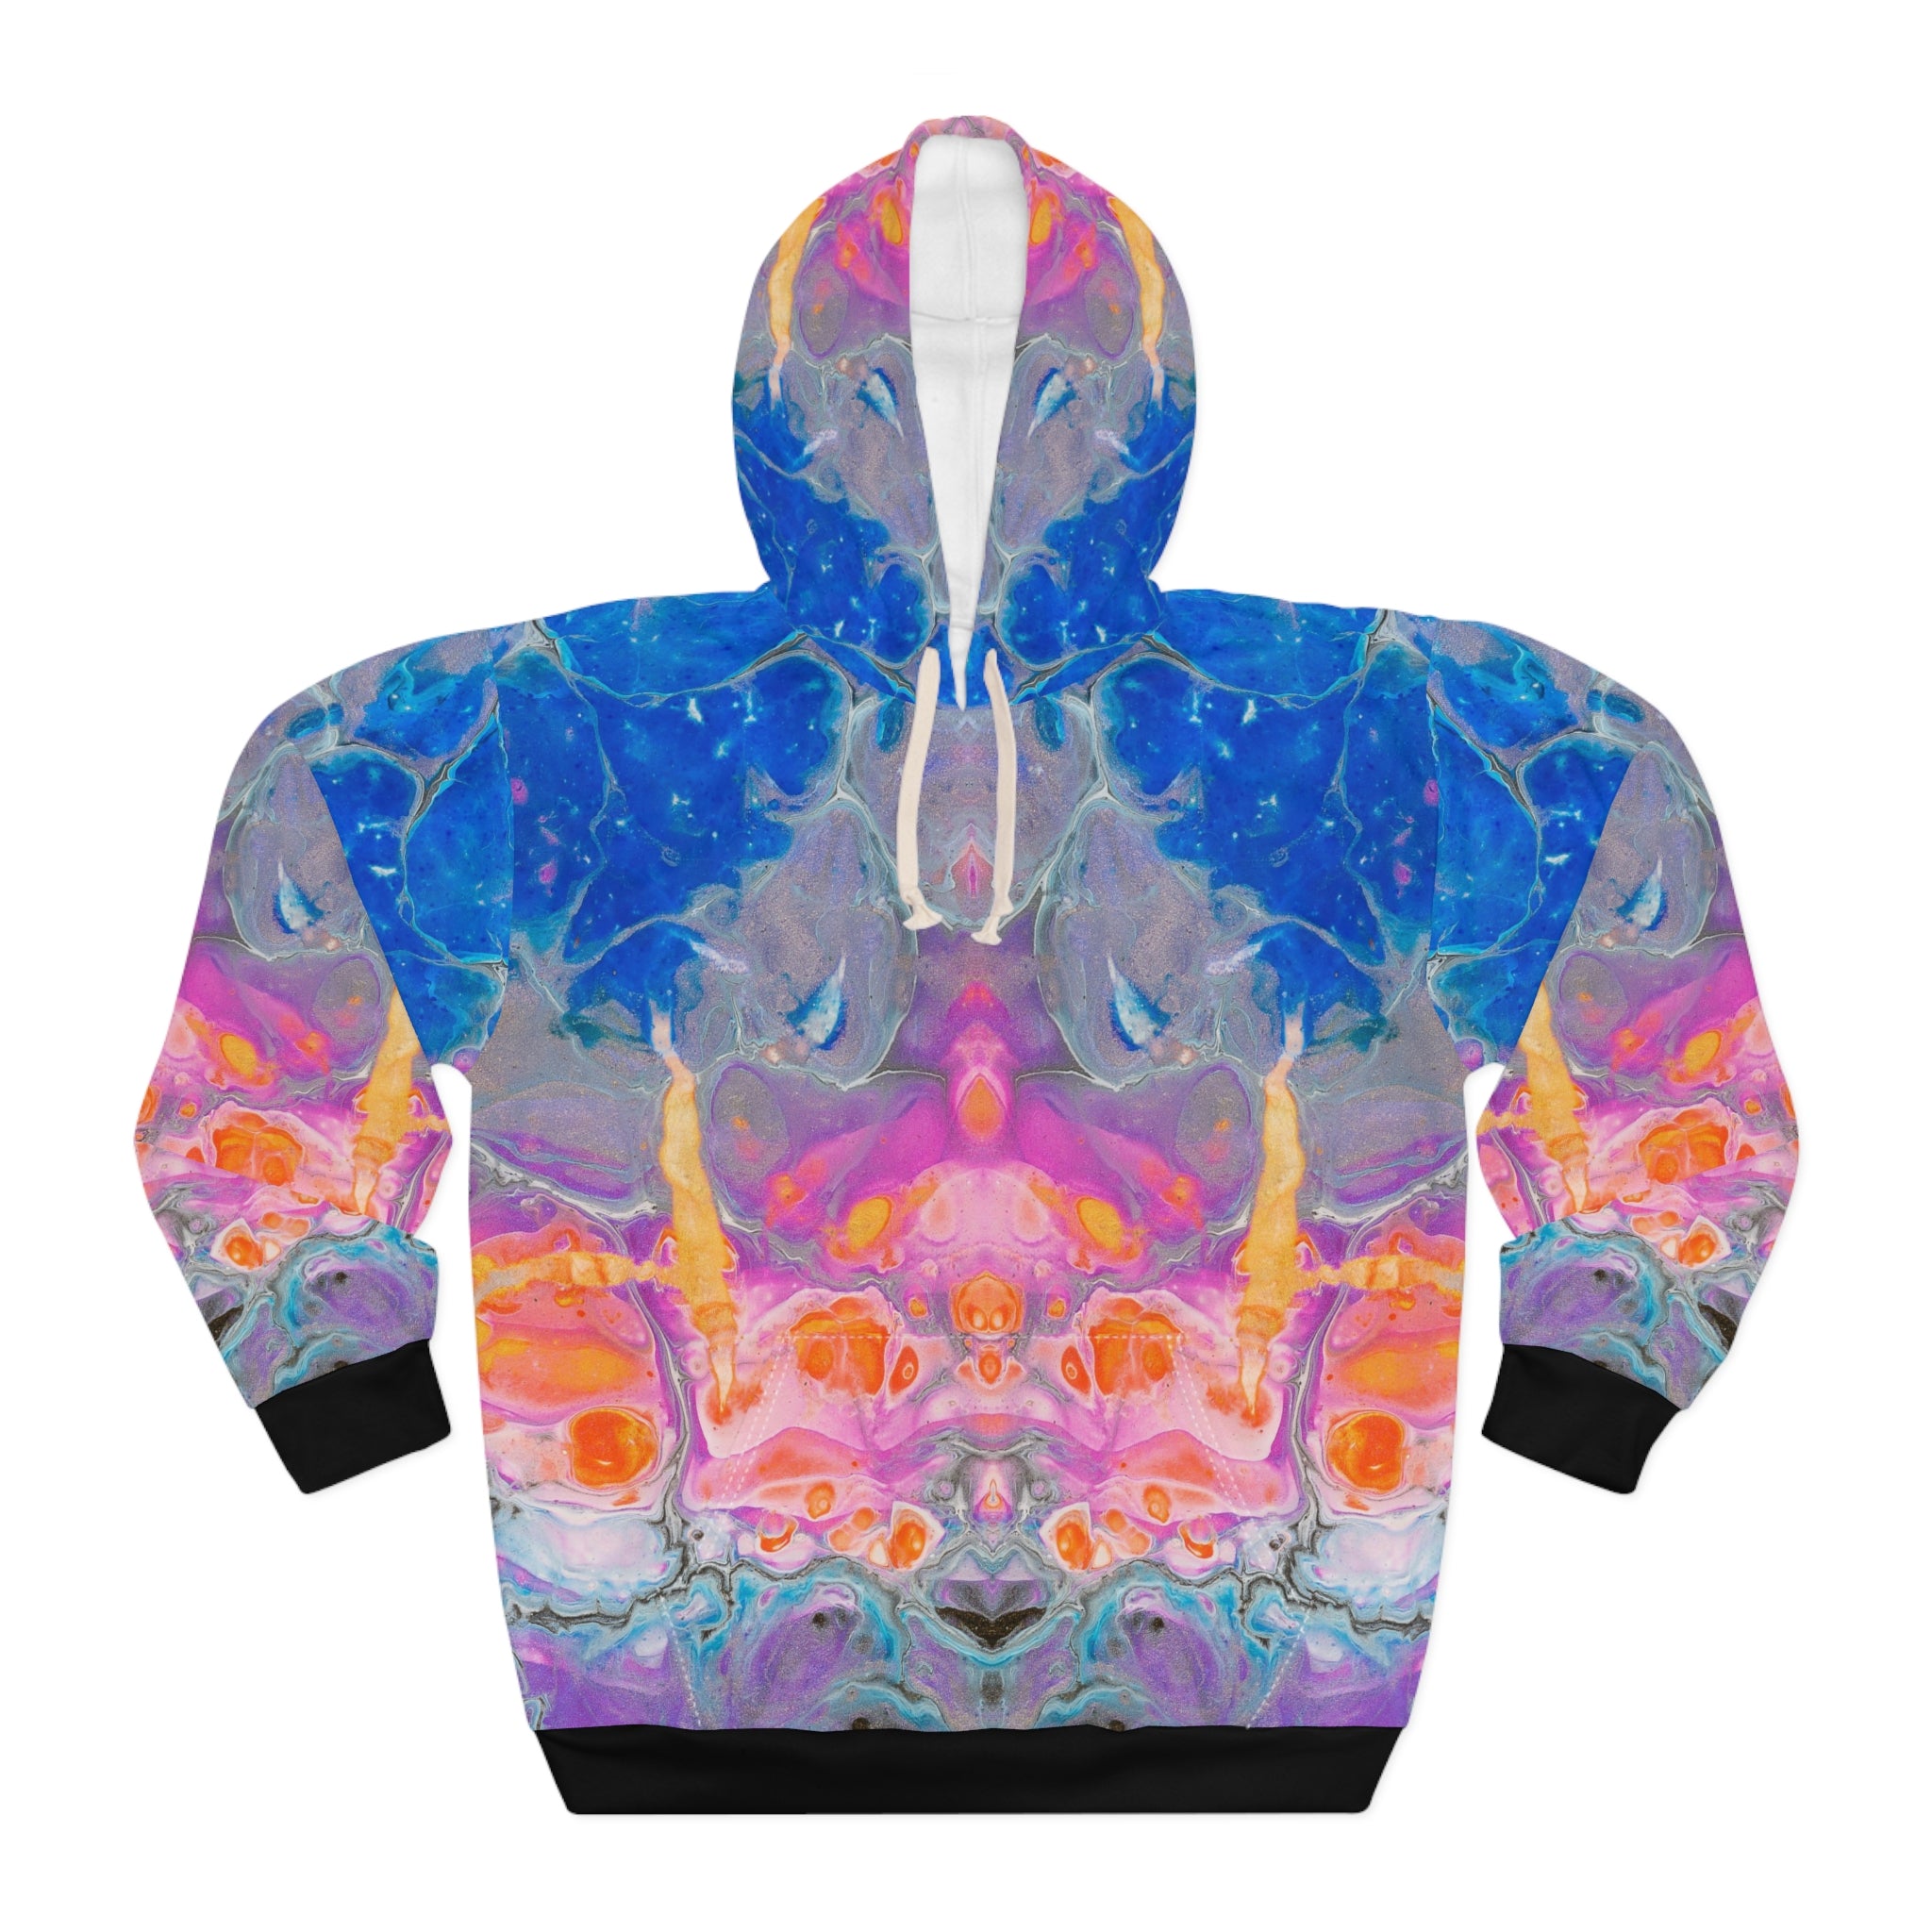 Cameron Creations - Fantasy Island - Pullover Hoodie - Front